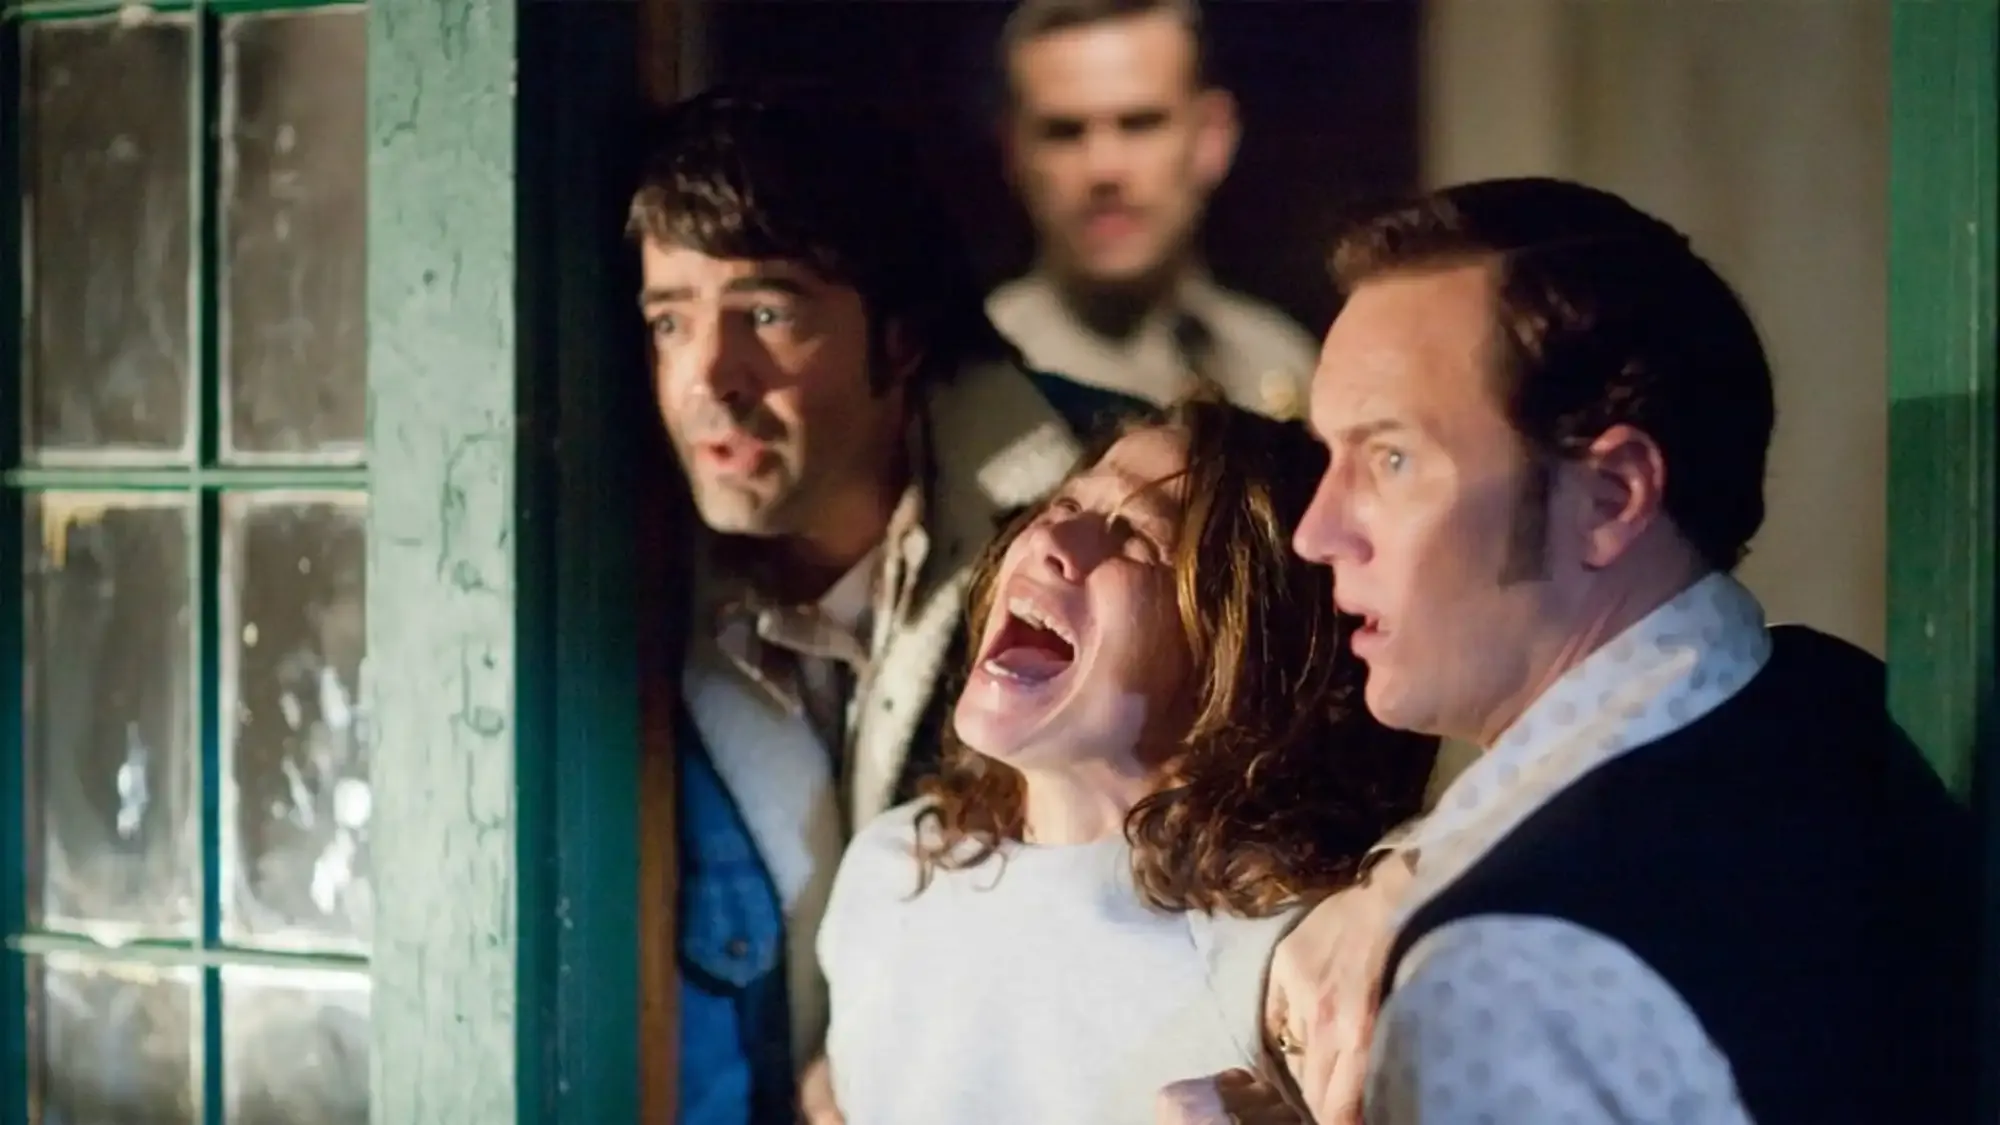 The Conjuring movie review